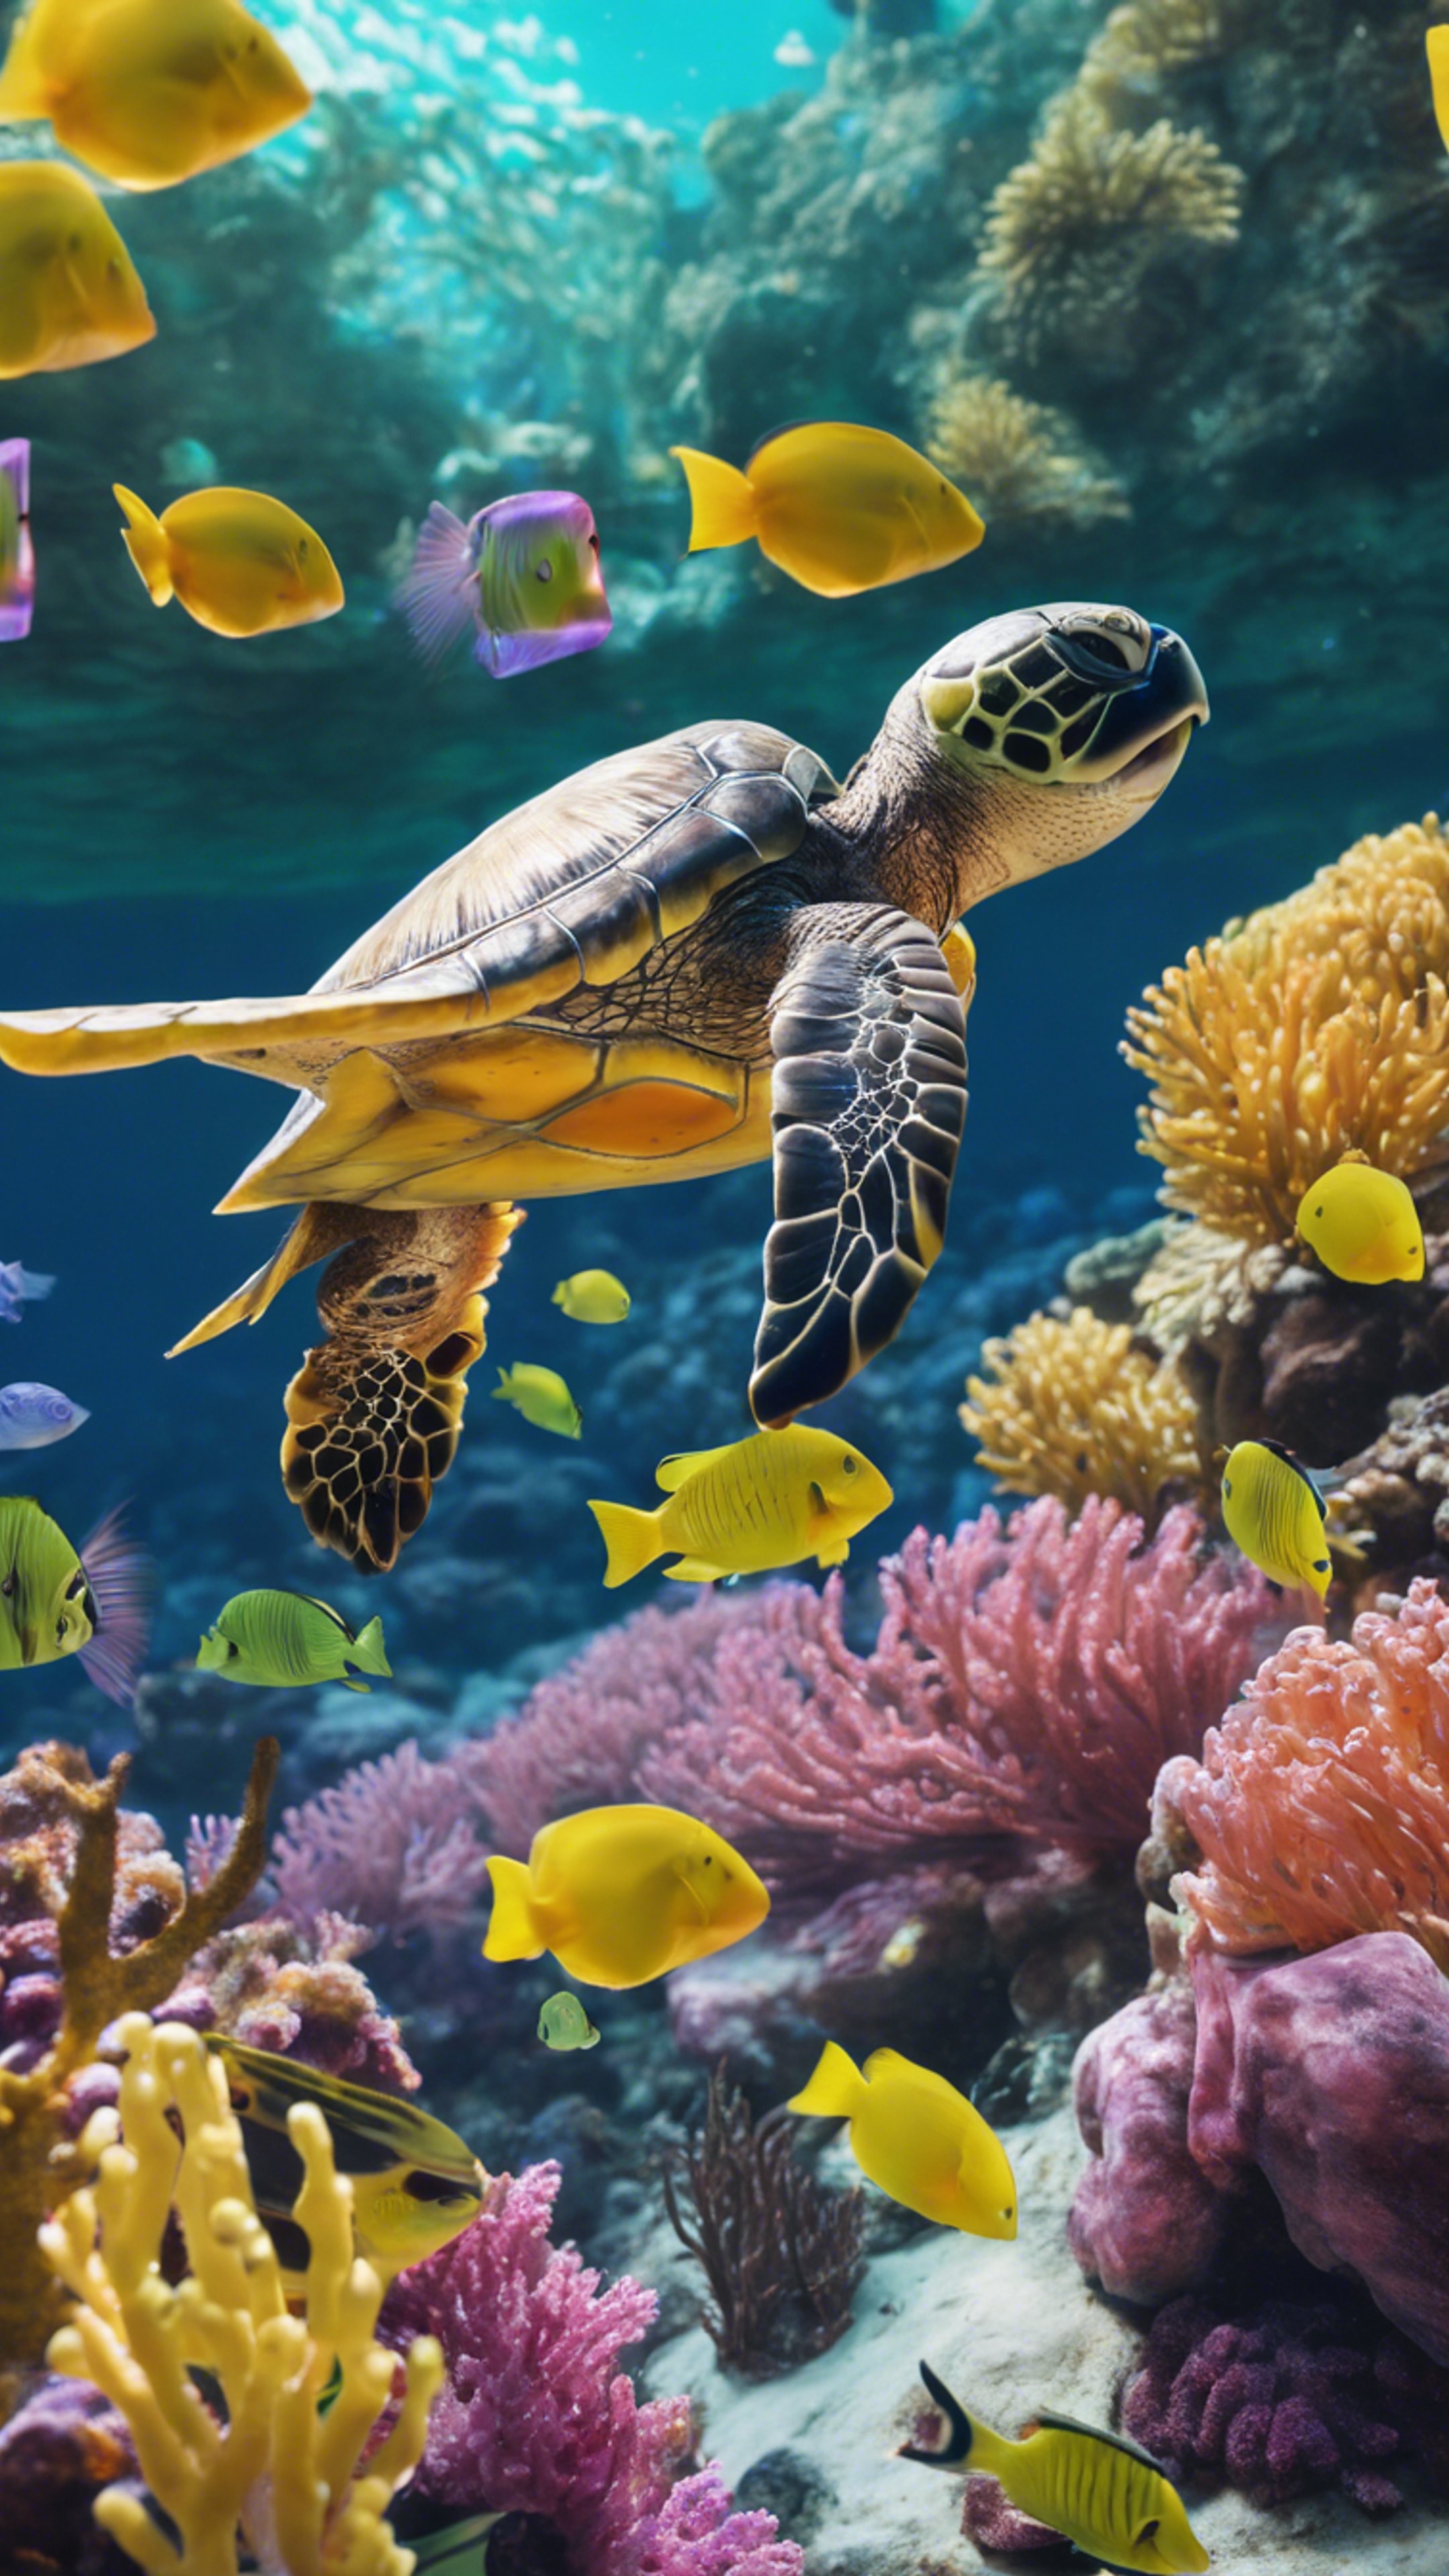 A sea turtle curiously interacting with colorful fishes in a reef. Валлпапер[2bbd294c31244e90b849]